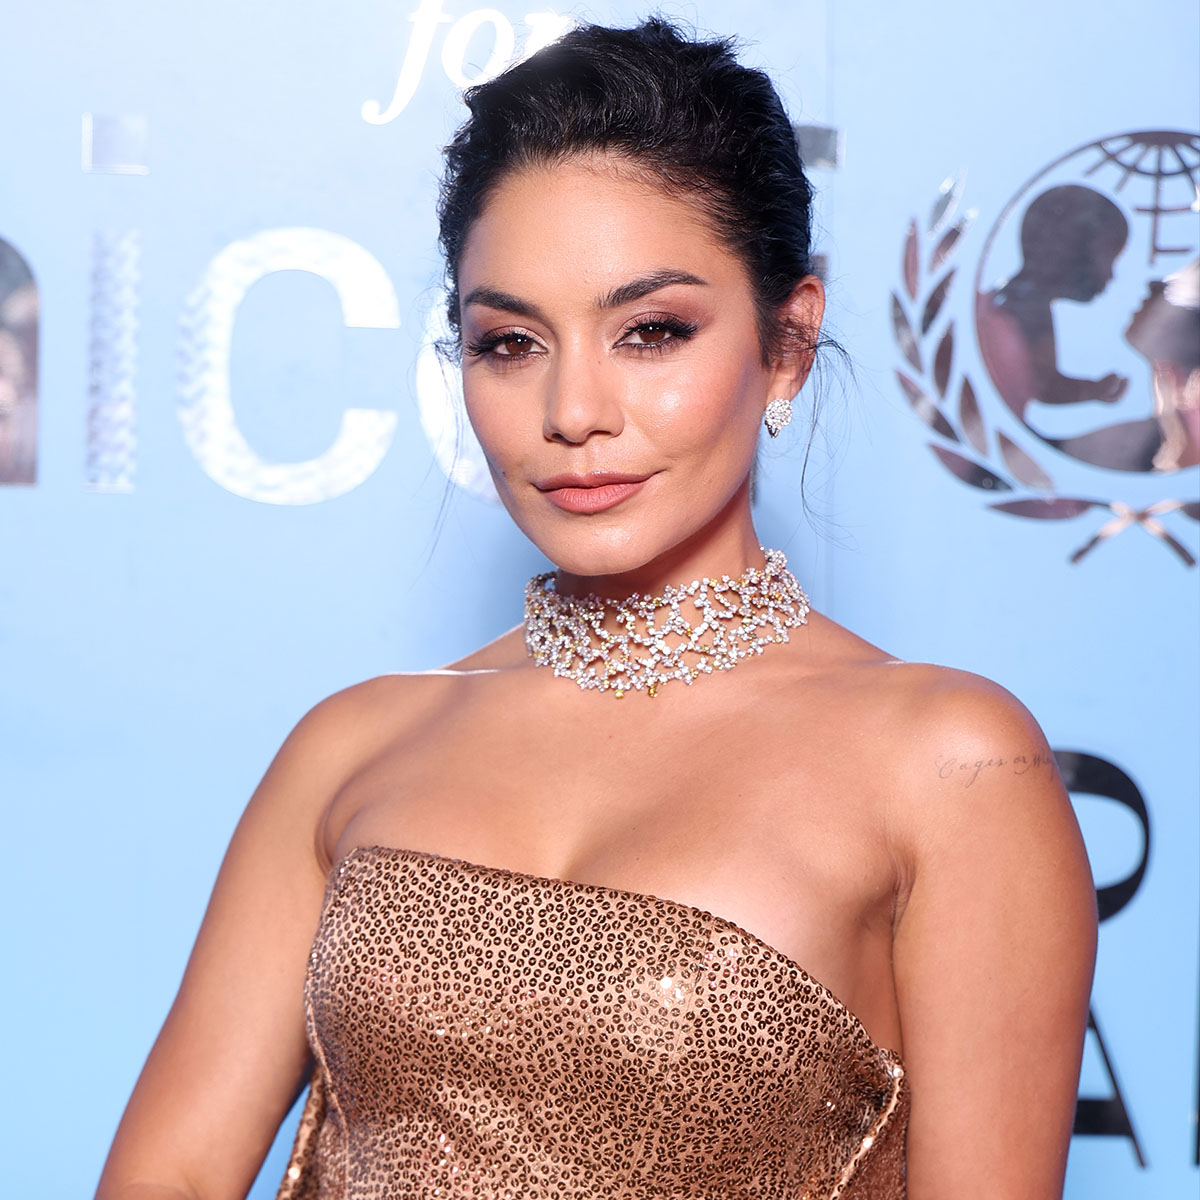 Vanessa Hudgens Reflects on "Very Long Life-Changing Relationships" With Zac Efron and Austin Butler